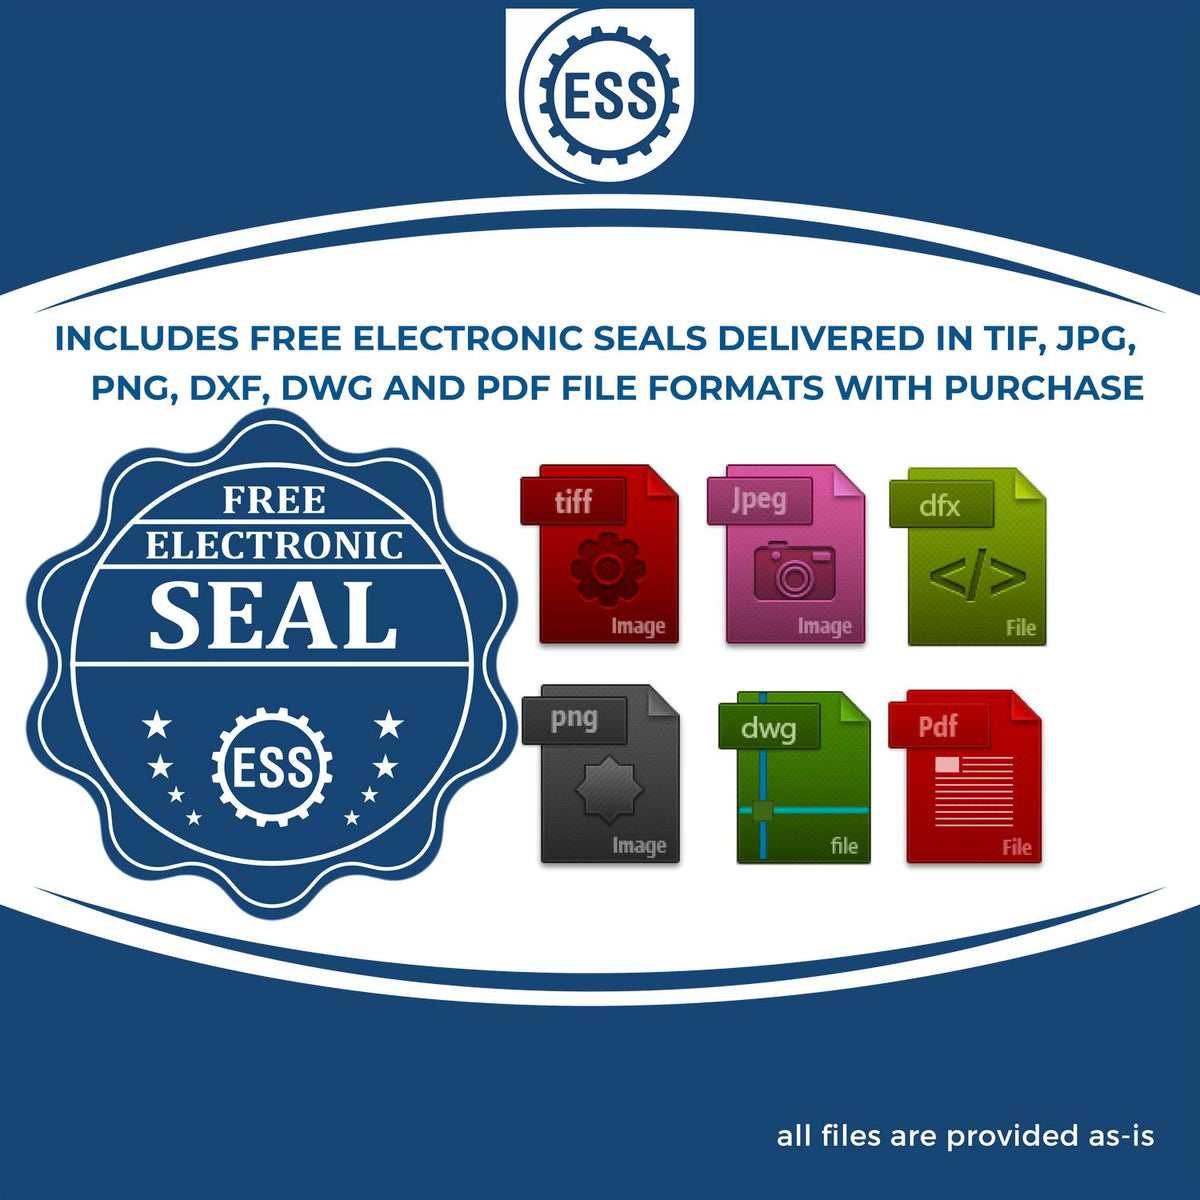 An infographic for the free electronic seal for the Self-Inking Rectangular Idaho Notary Stamp illustrating the different file type icons such as DXF, DWG, TIF, JPG and PNG.